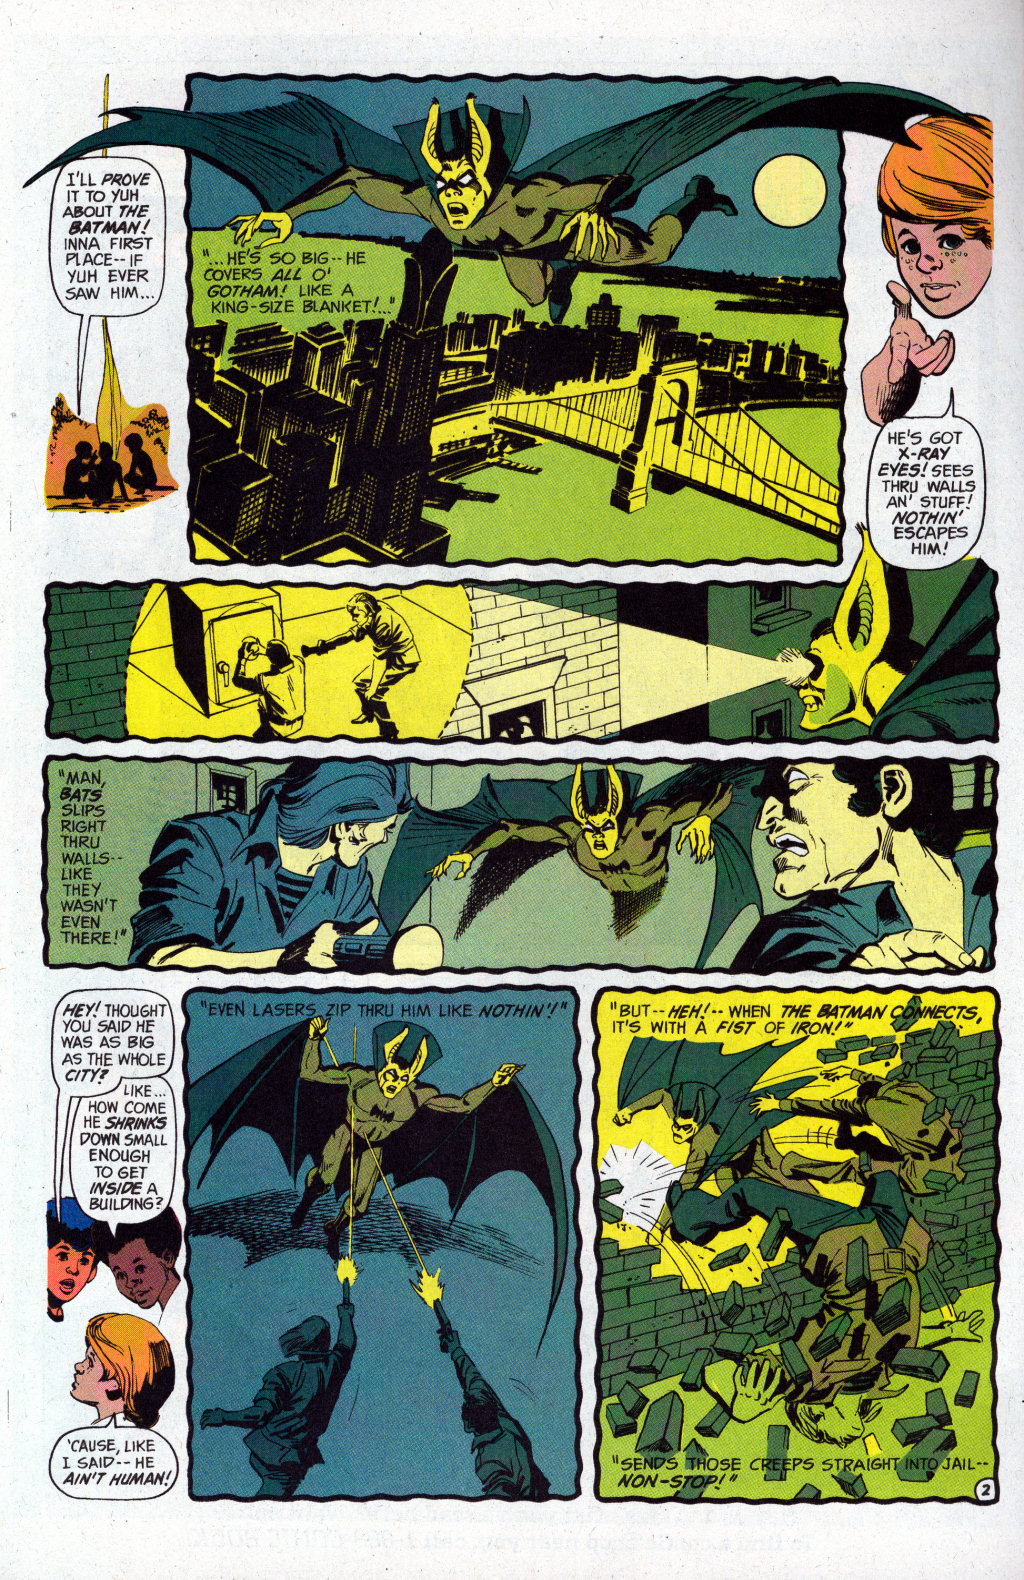 The Batman Strikes! issue 1 (Burger King Giveaway Edition) - Page 30